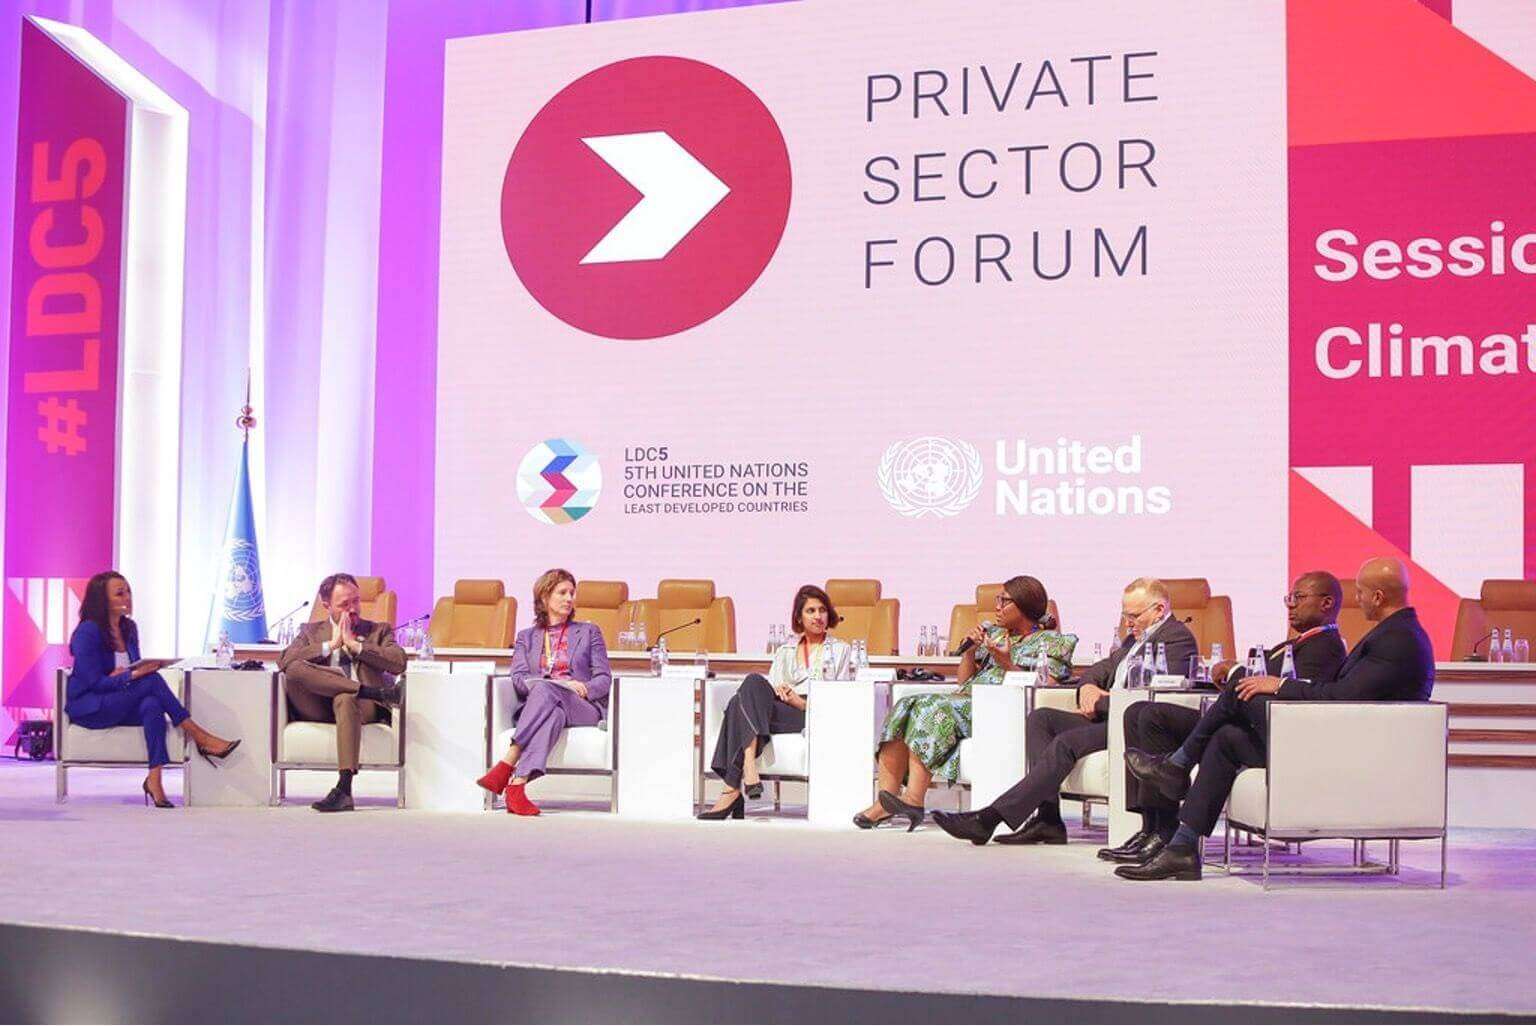 LDC 5th United Nations Conference in Doha: Delphine Traoré advocates for greater private sector engagement in achieving sustainable solutions for Africa's prosperity